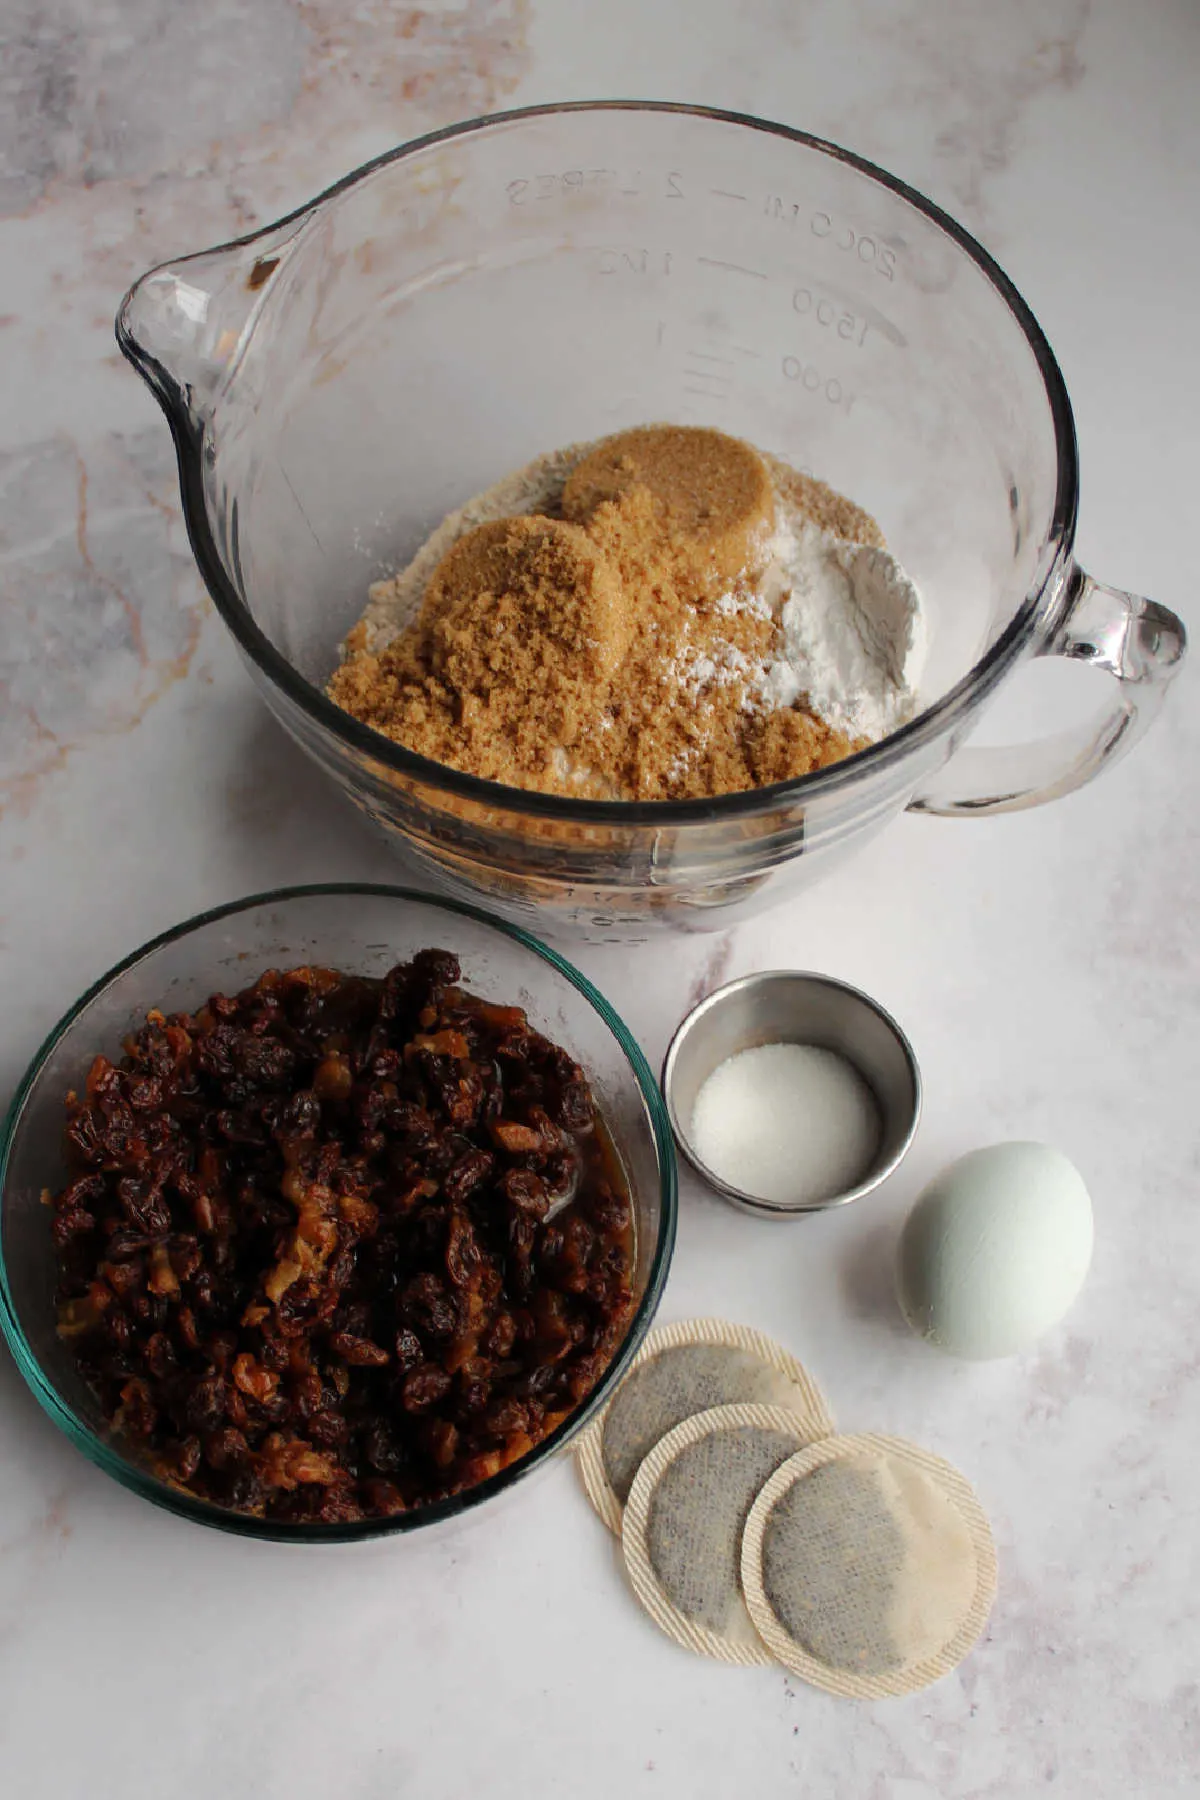 Irish tea brack ingredients including bowl of flour and sugar, raisins and dates soaking in tea, tea bags, sugar and an egg ready to be made into batter.